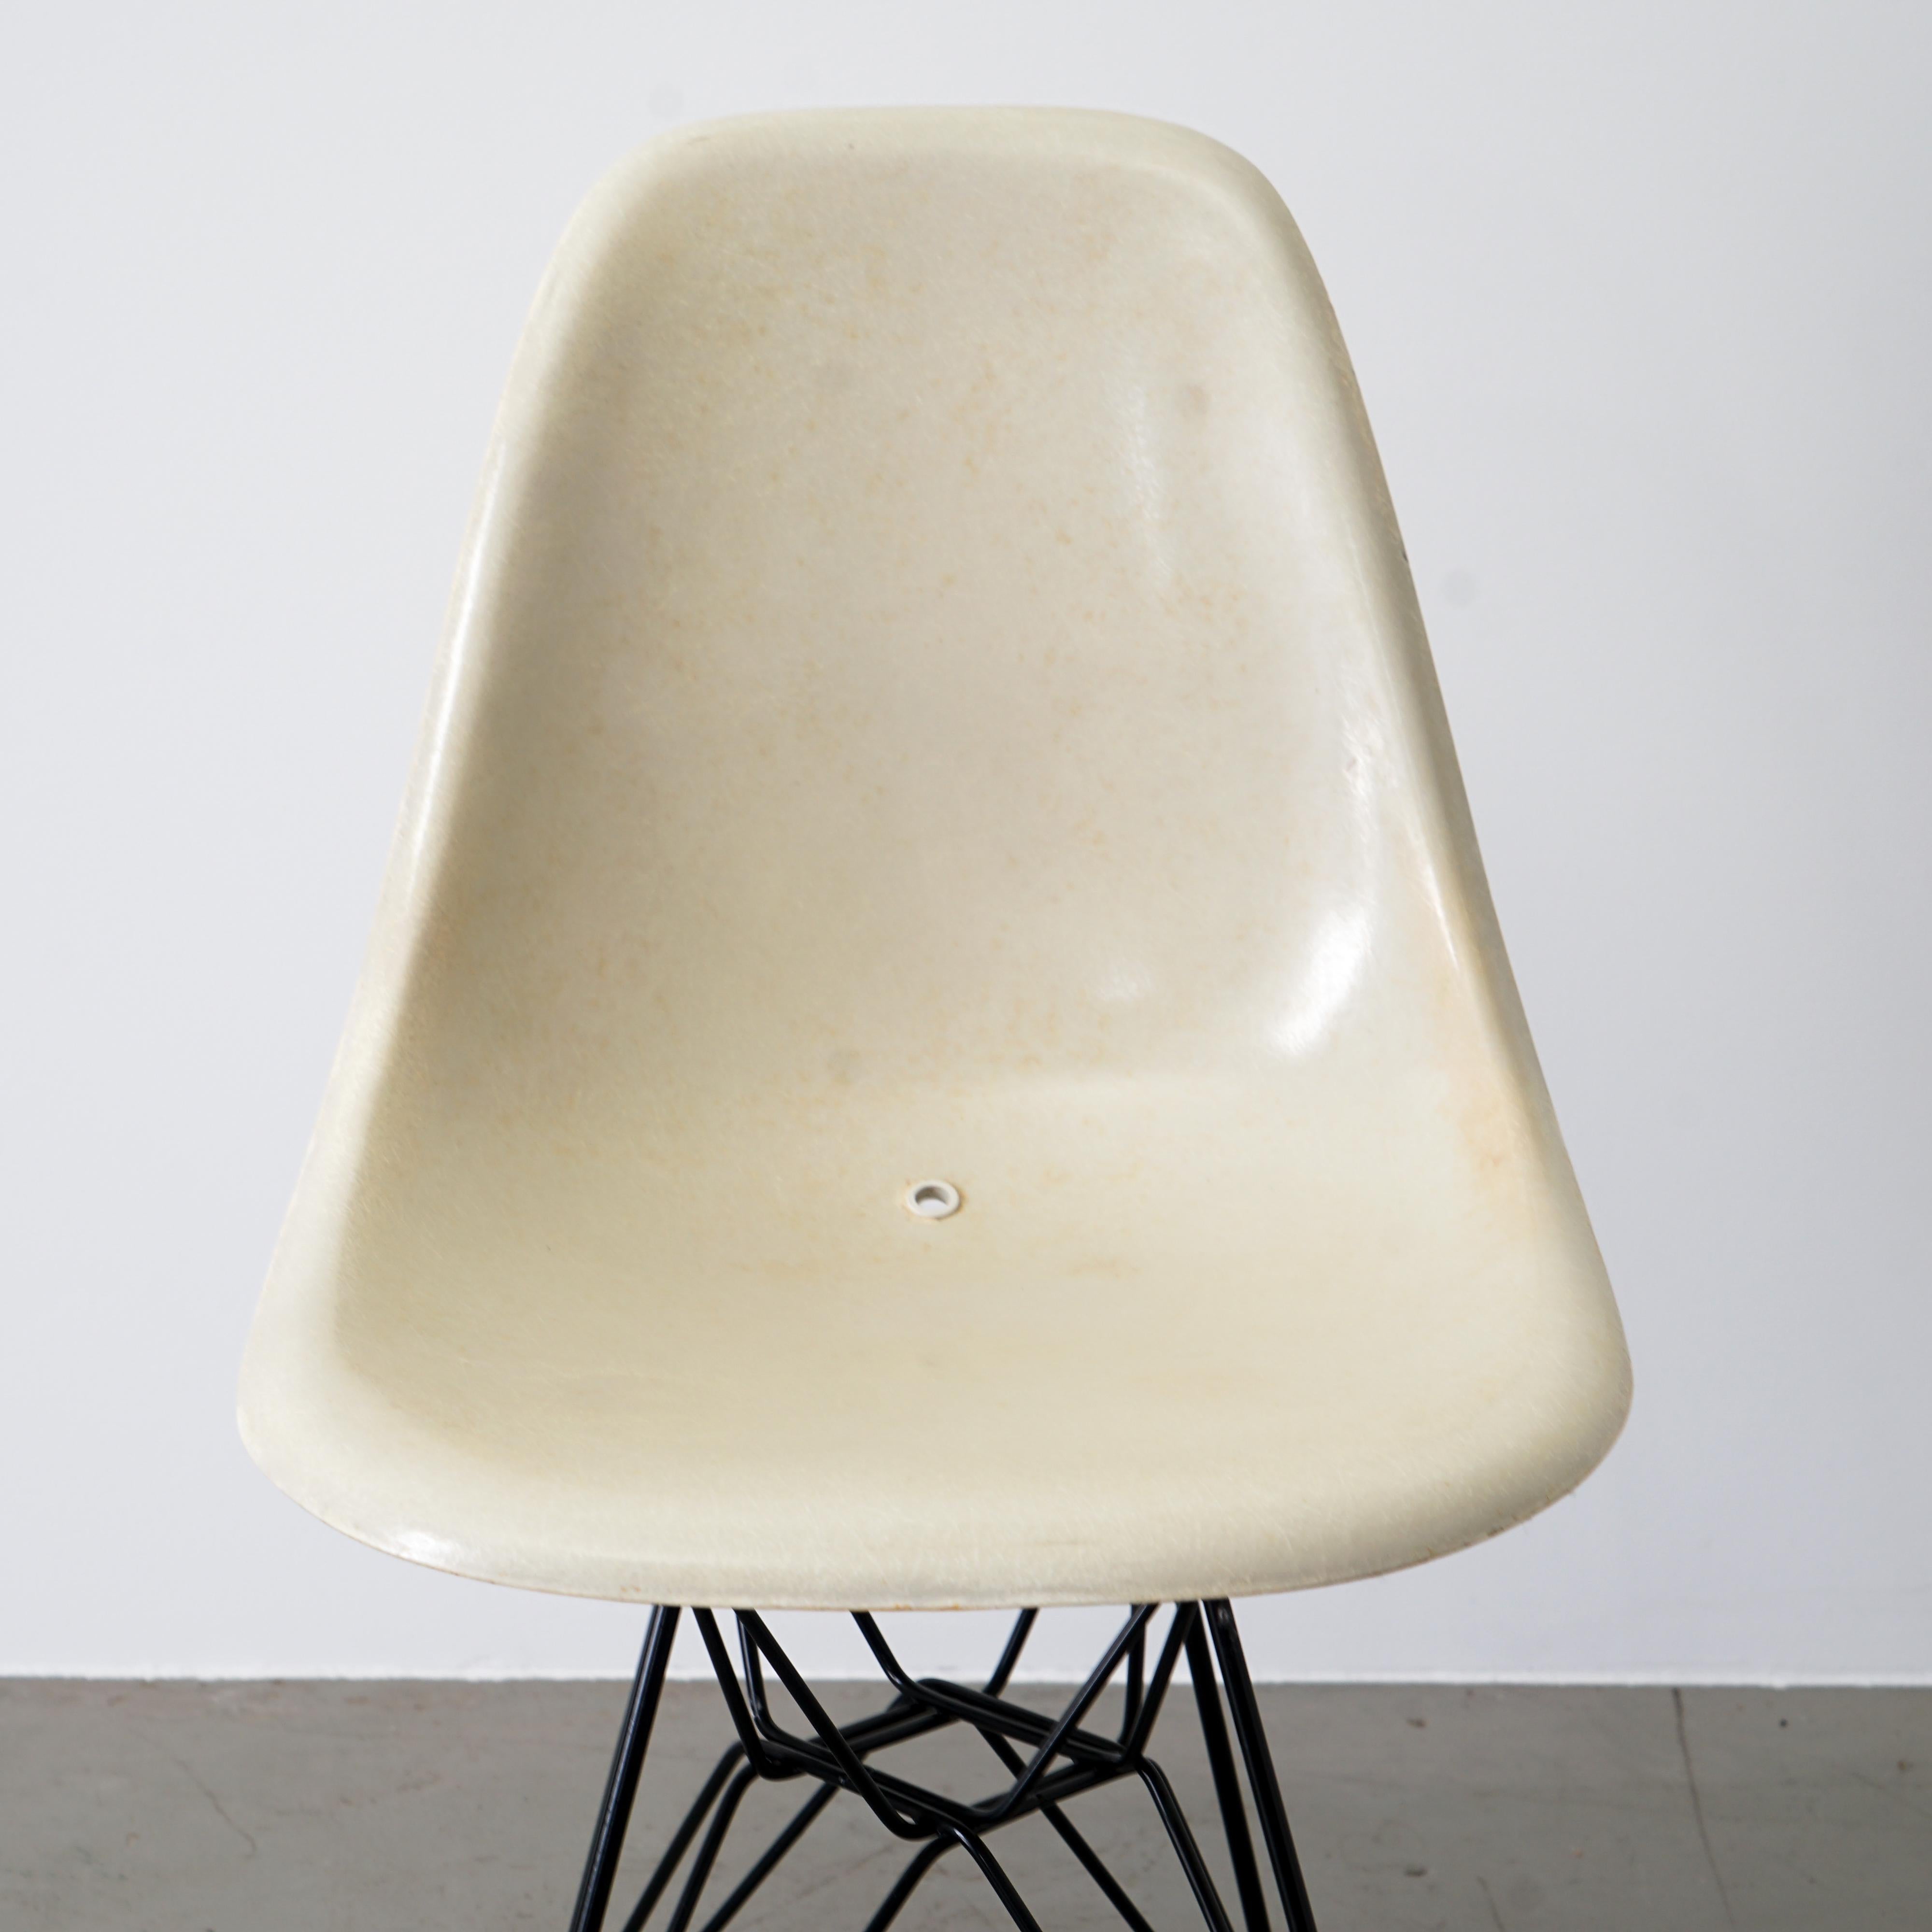 Original Sidechair DSW Designed by Charles and Ray Eames (amerikanisch) im Angebot